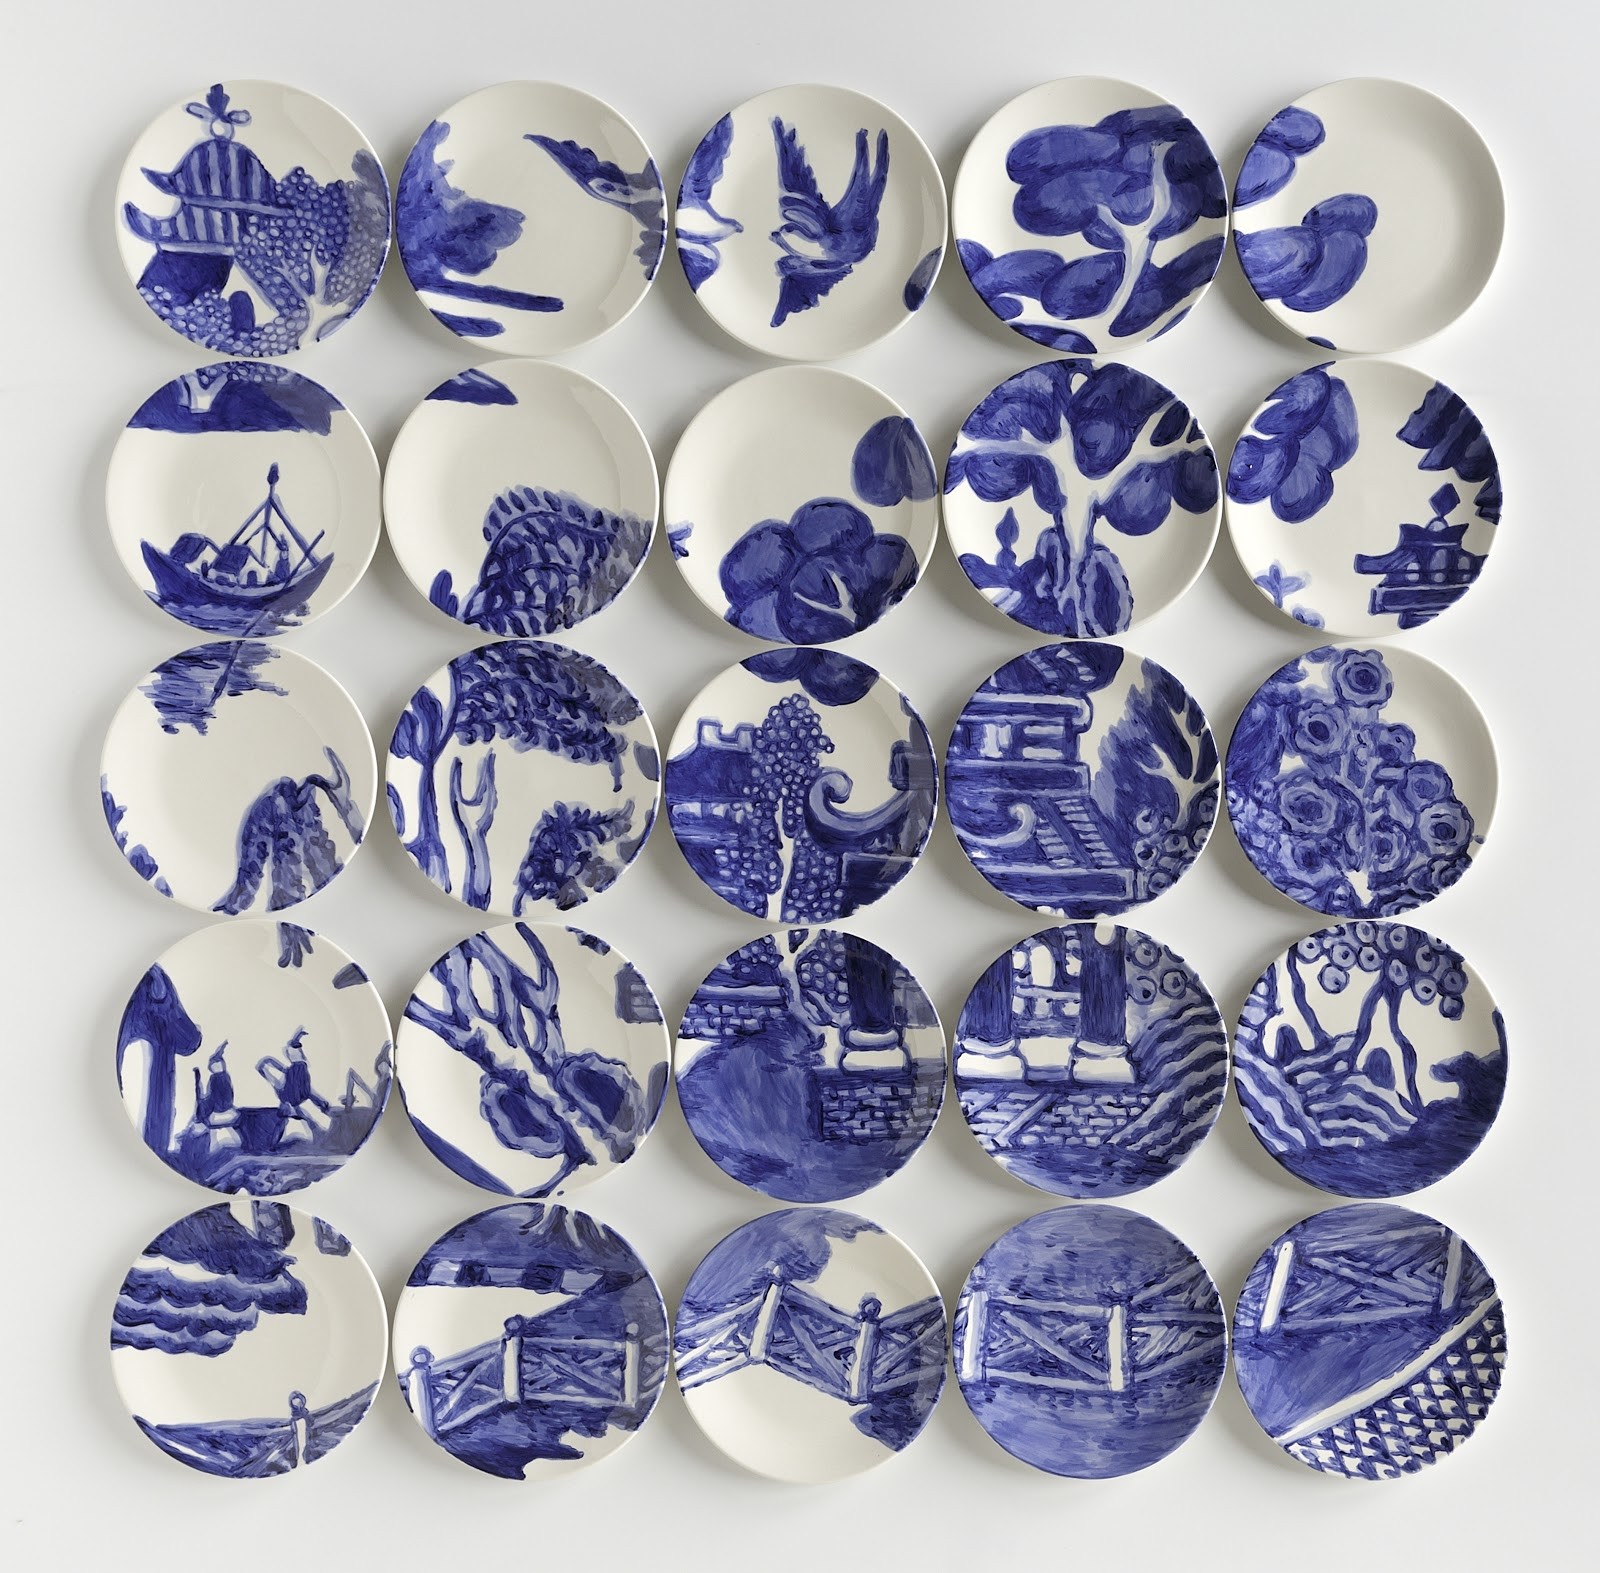 Molly hatch uses ceramic plates to create an unusual canvas